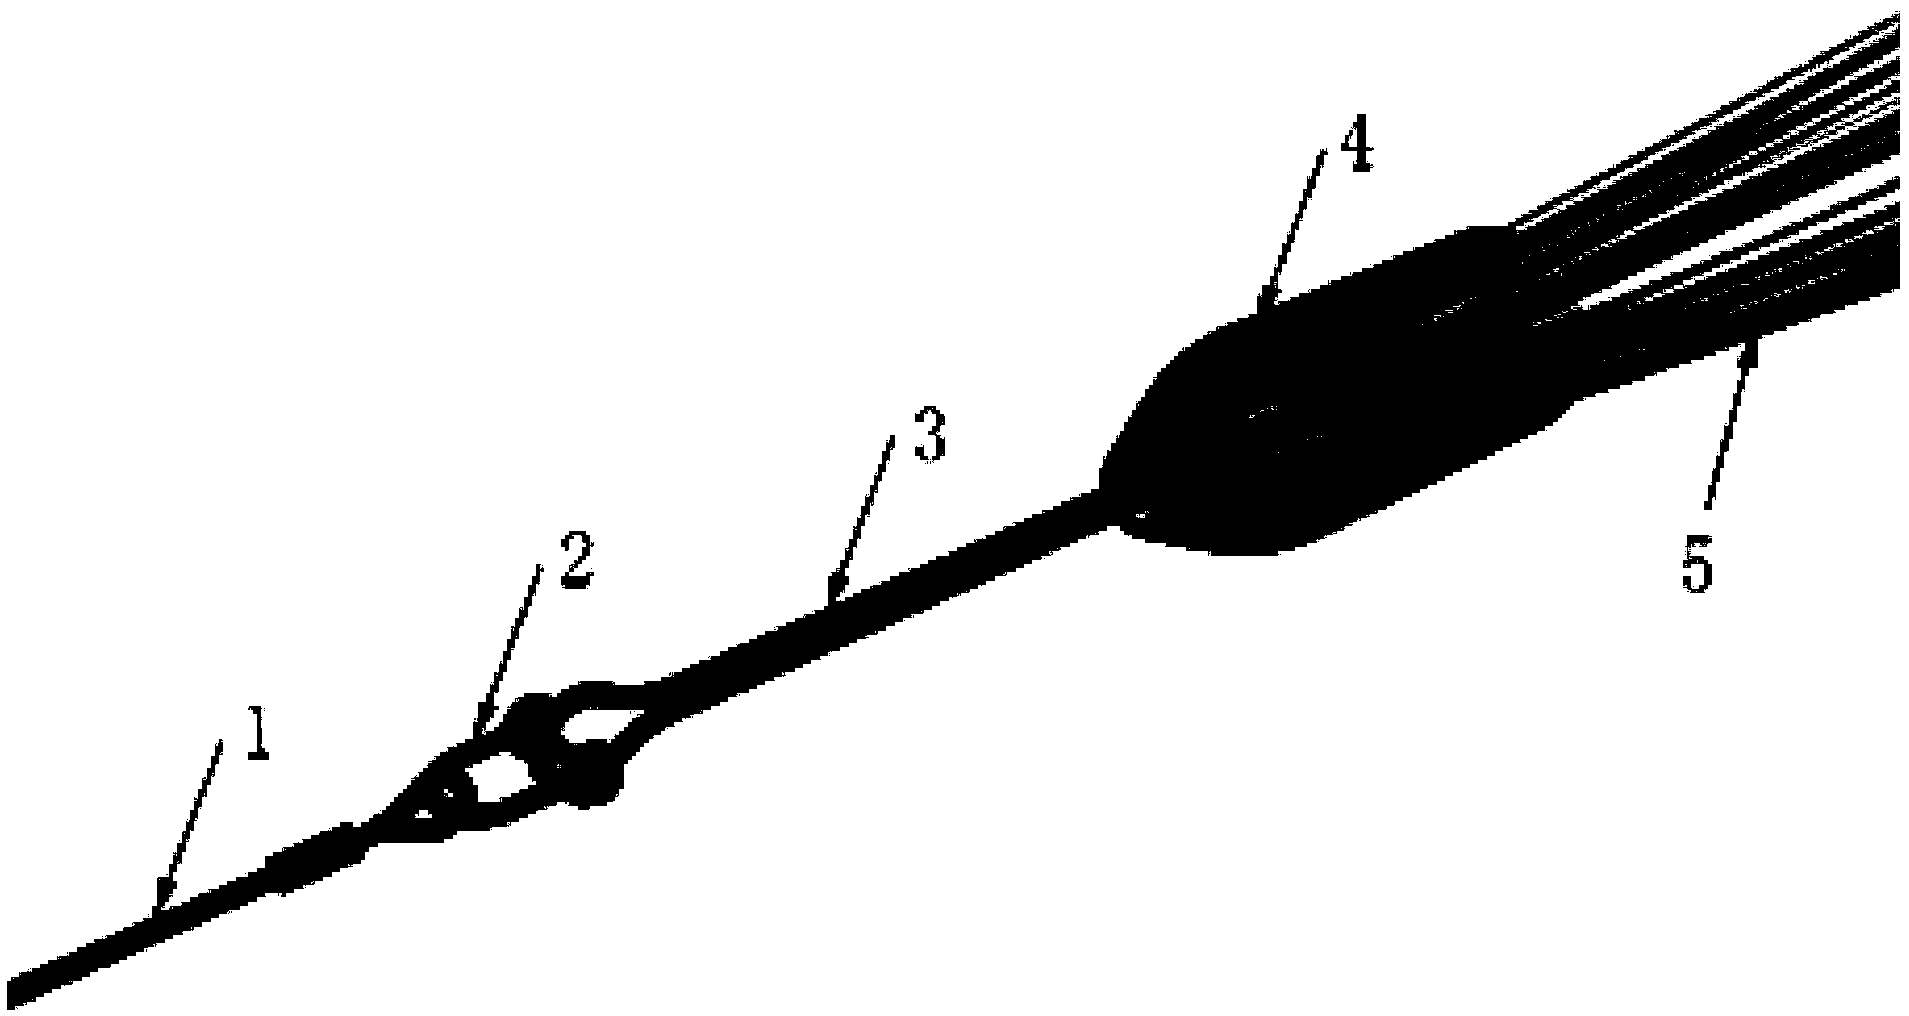 Superlong prestress strand combing, binding and strand pulling integrated device